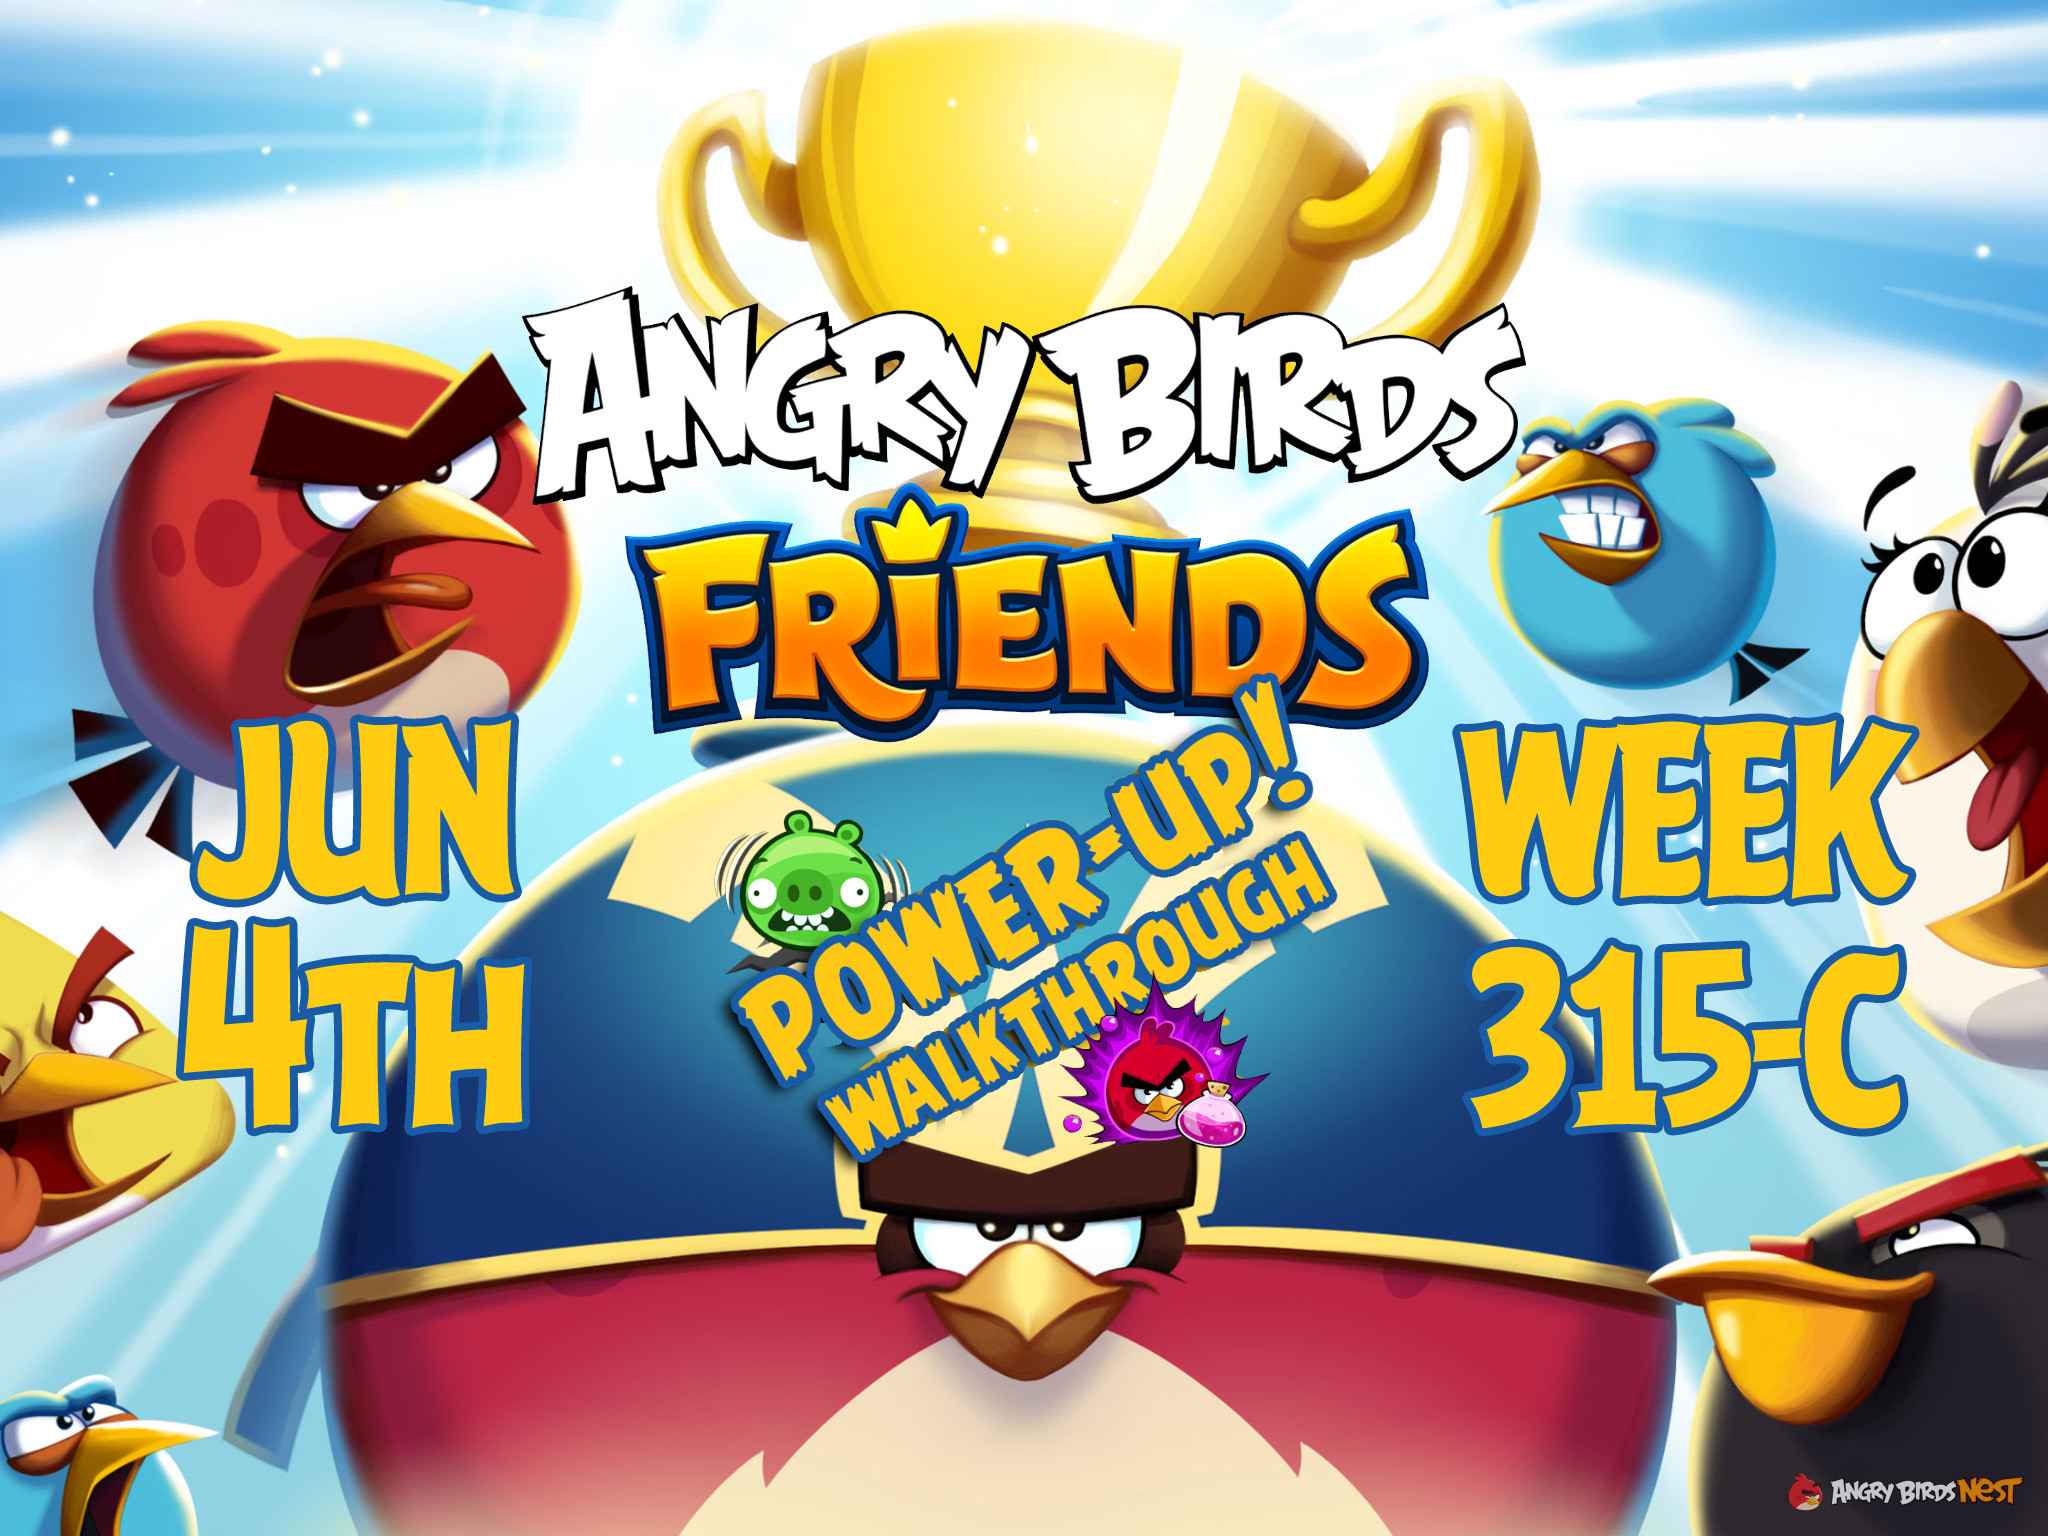 Angry Birds Friends Tournament Week 315-C Feature Image PU